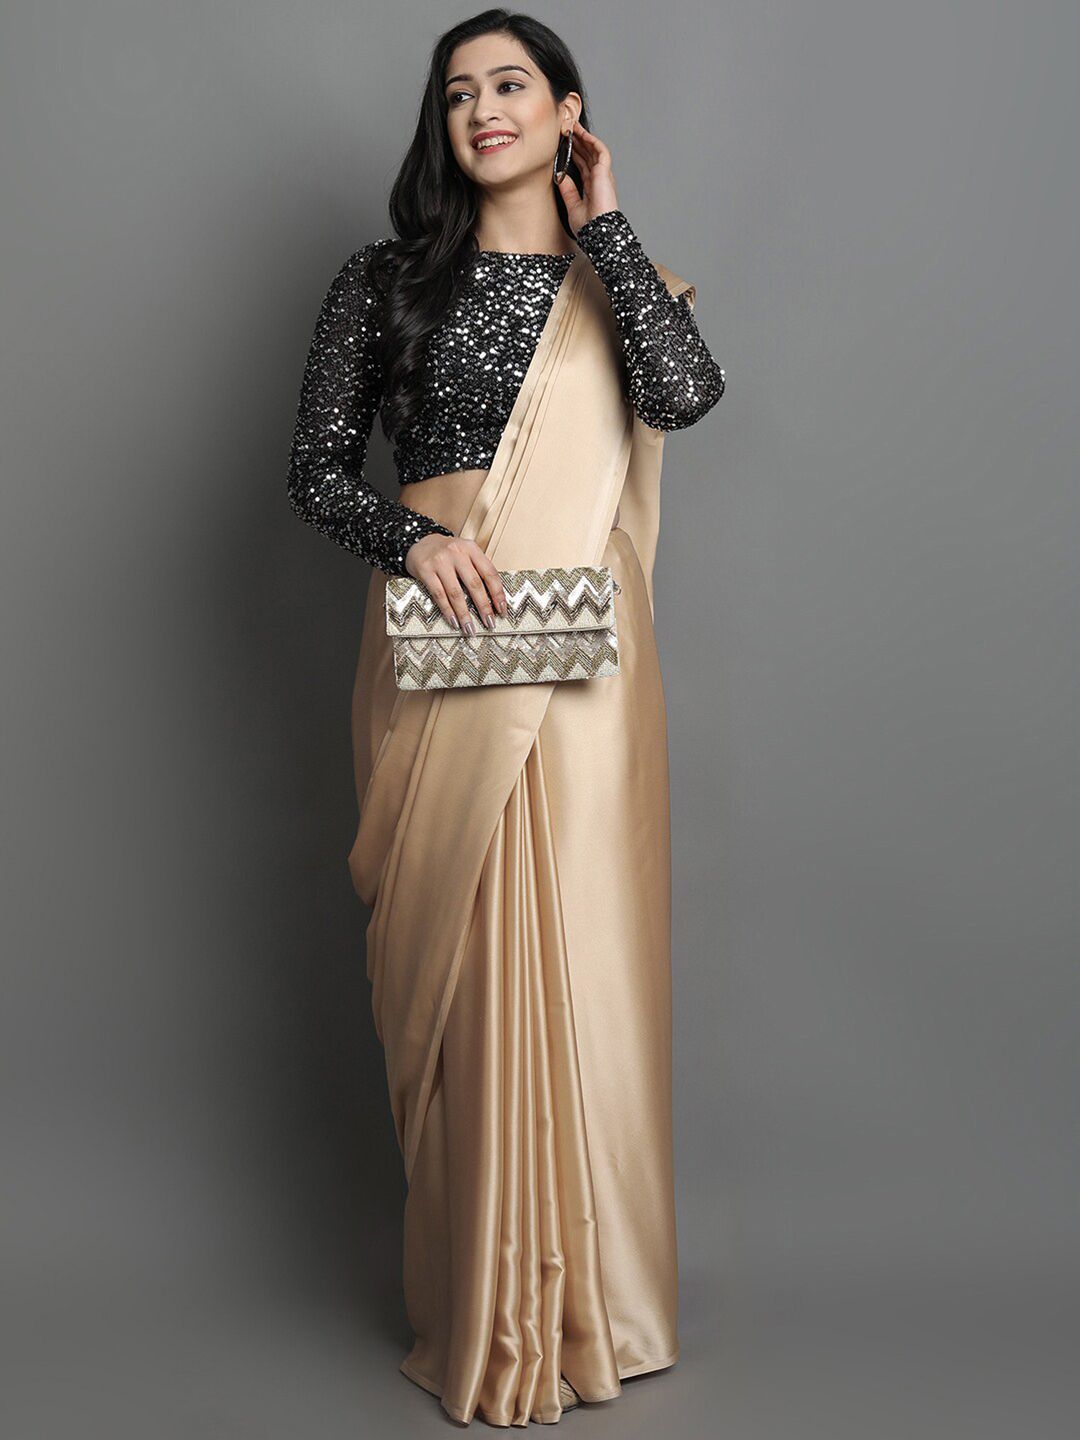 KALINI Beige Satin Saree With Sequinned Blouse Piece Price in India